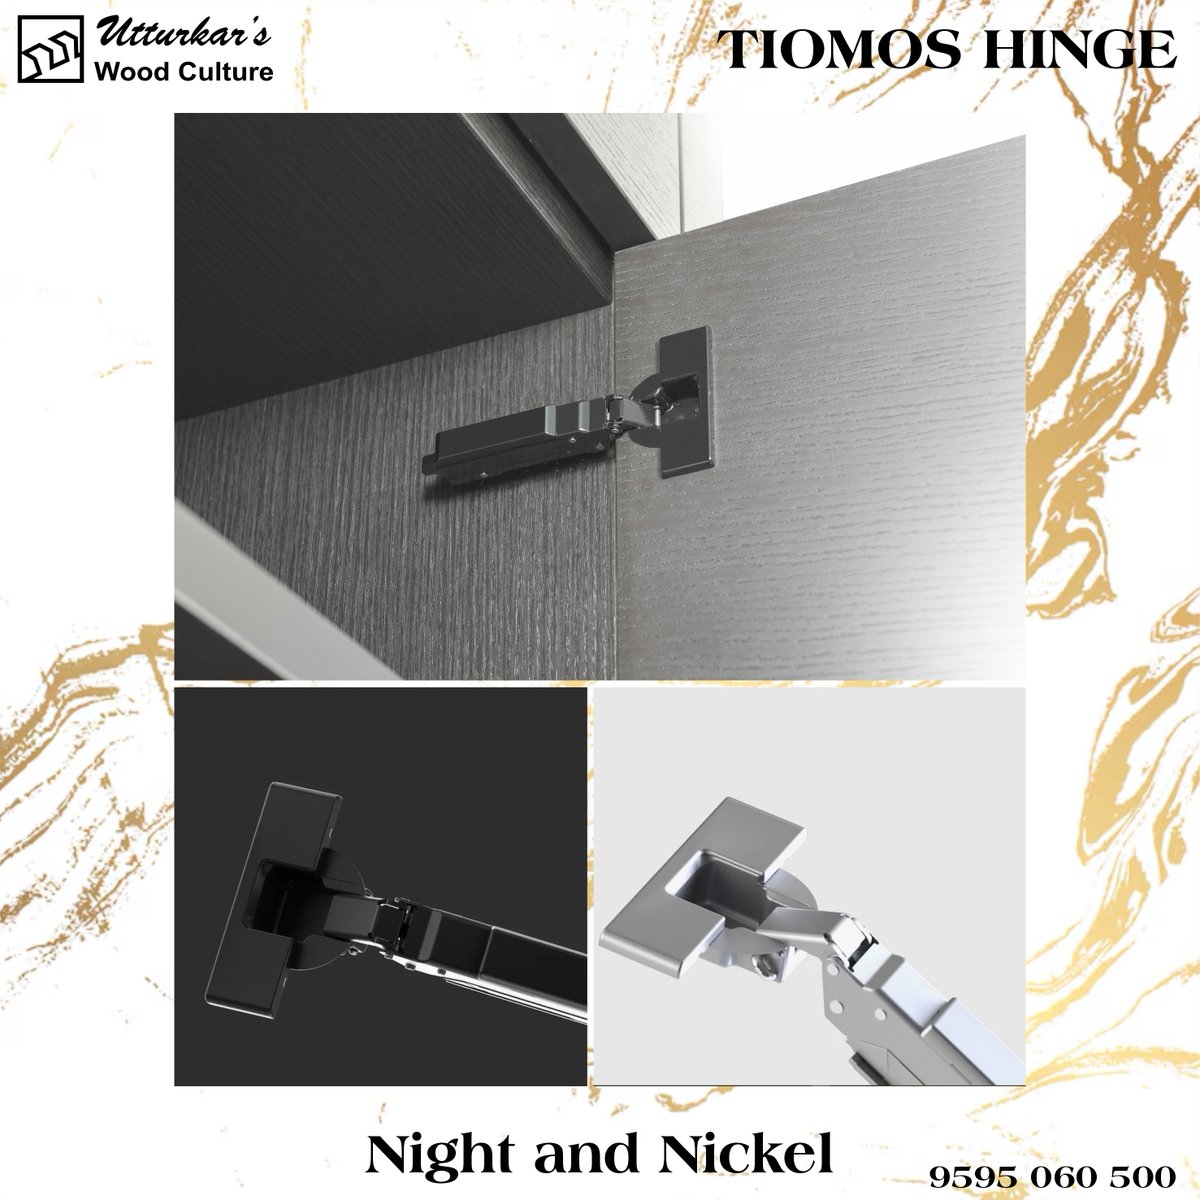 Tiomos hinges
Contact 9595-060-500 or email marketing@utturkars.co.in

#tiomoshinges #hinges #qualityhinges #softclosehinges #smartsolutions #tarekutturkar #UtturkarsWoodCulture #kitchens #kitcheninteriors #trending #foryou